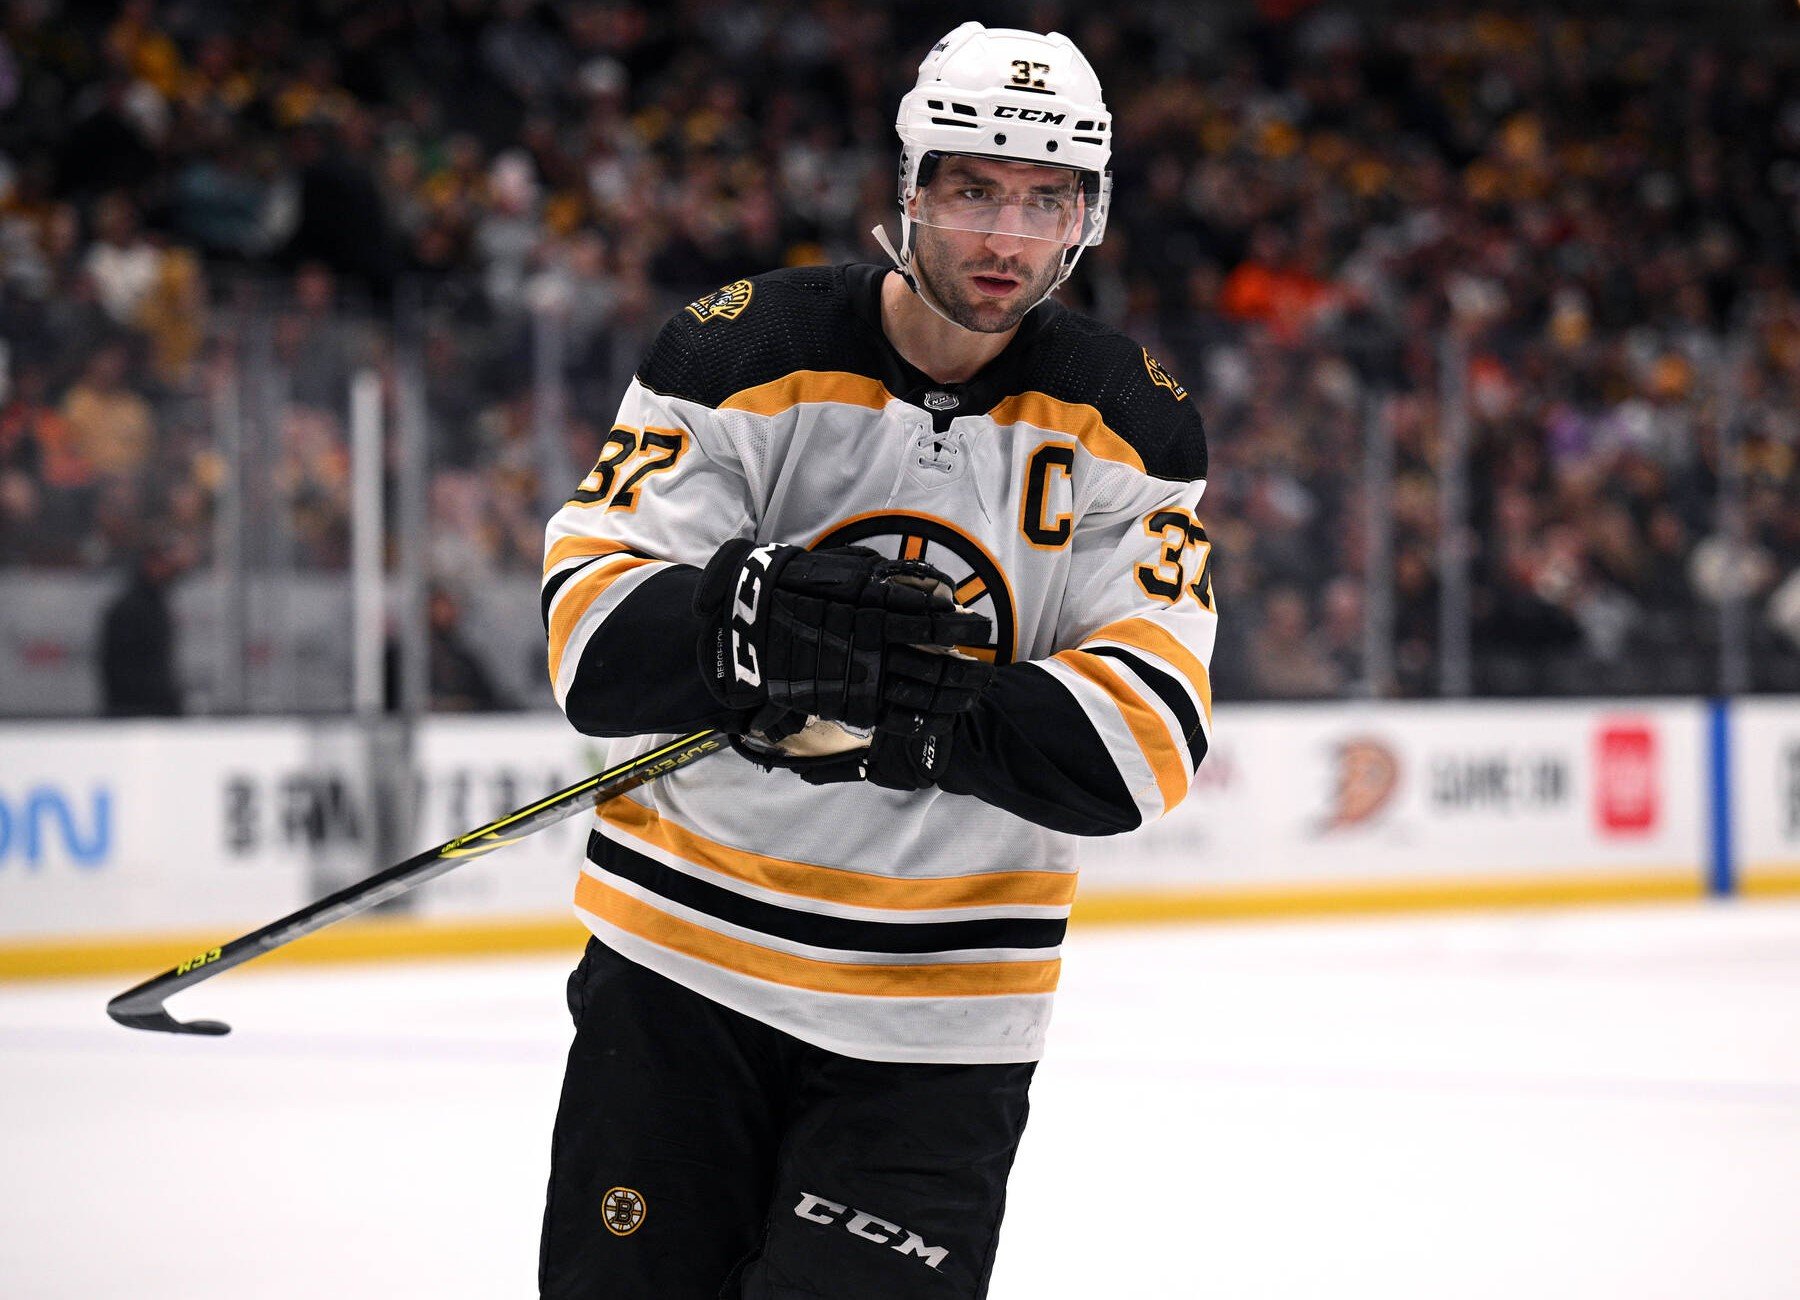 Patrice Bergeron is newest member of the 1,000 point club